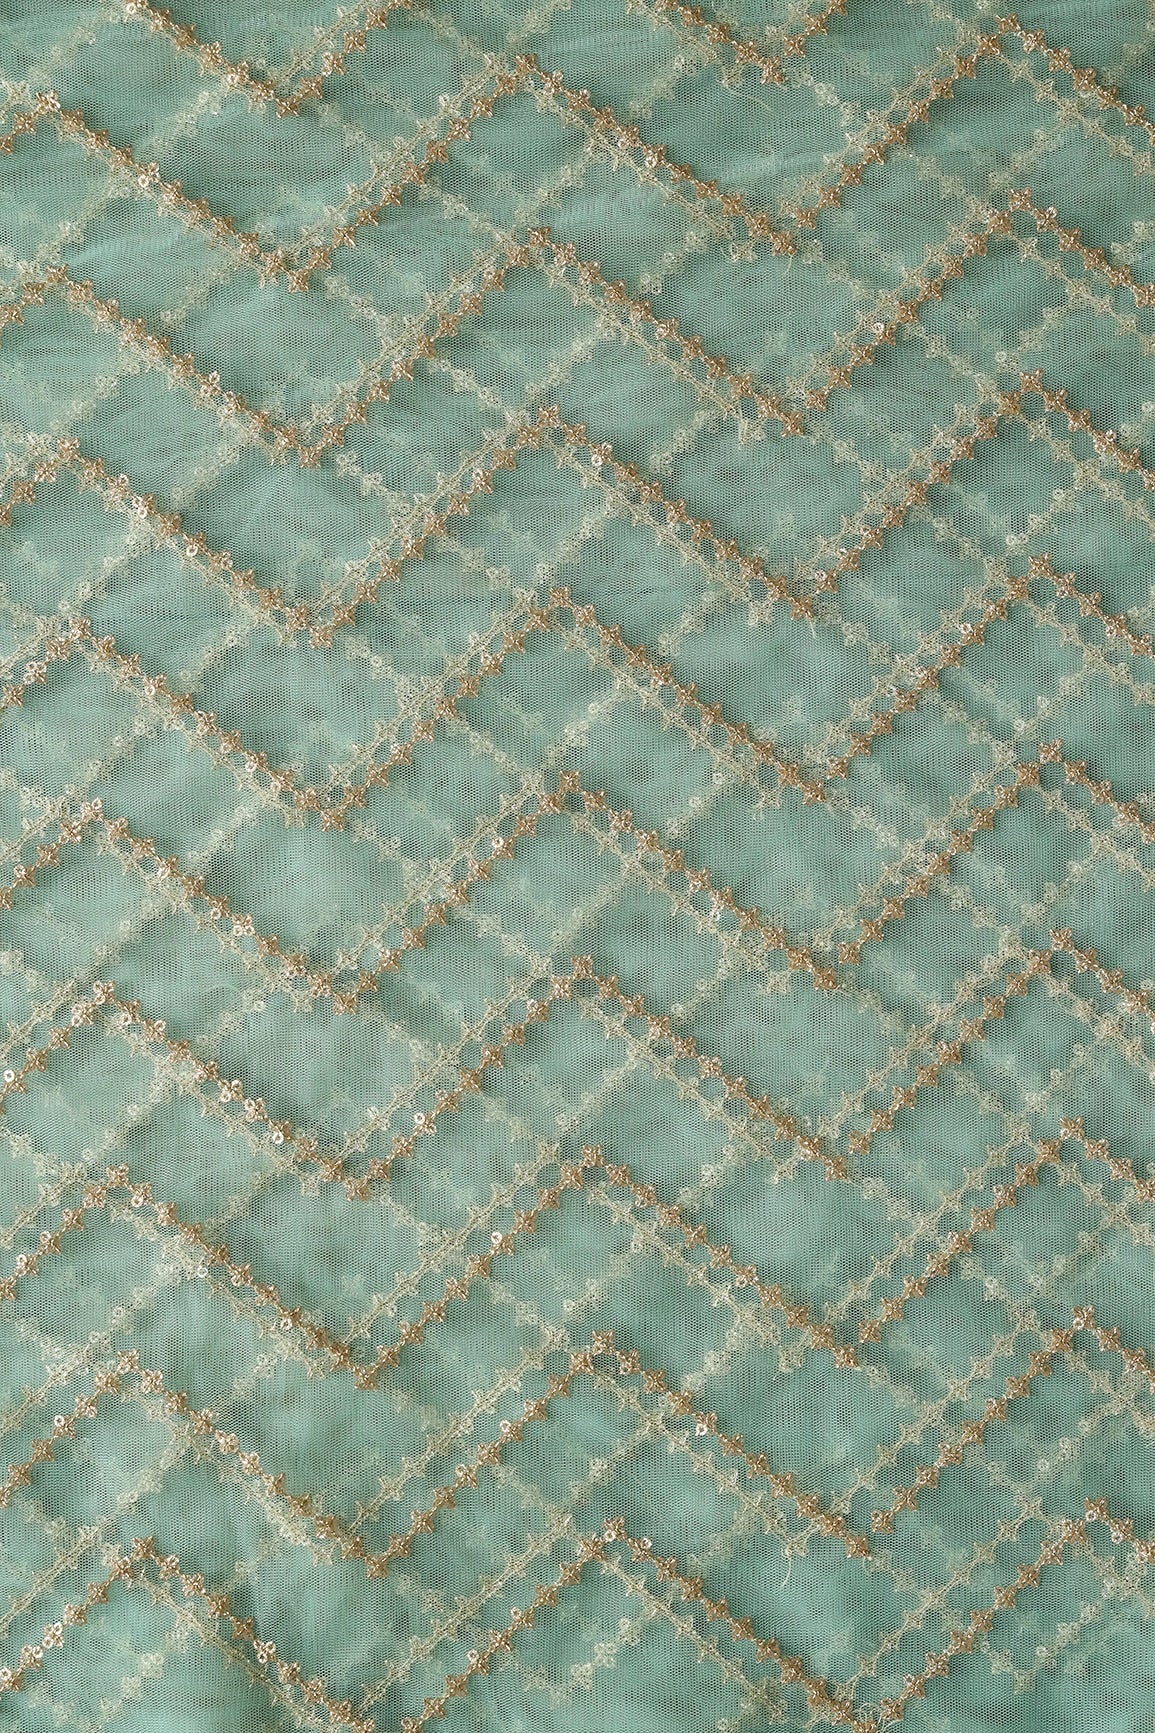 2 Meter Cut Piece Of Gold Sequins Chevron Embroidery On Teal Soft Net Fabric